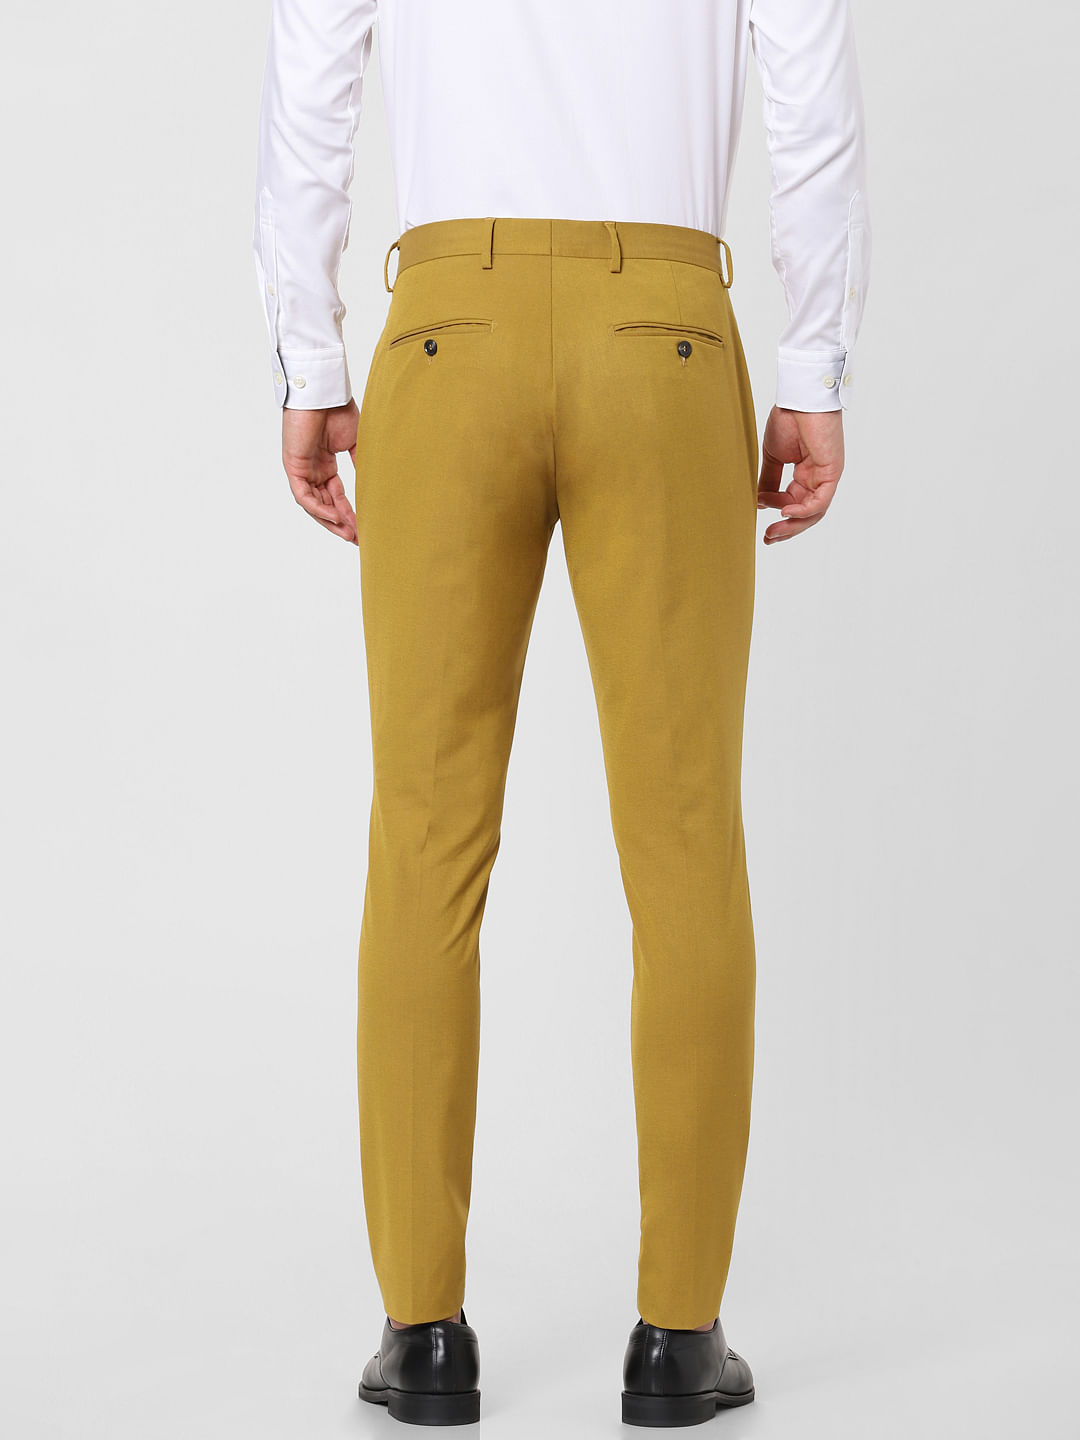 Buy Mens Argentine Tango Pants Men Mustard Yellow Trousers Online in India   Etsy